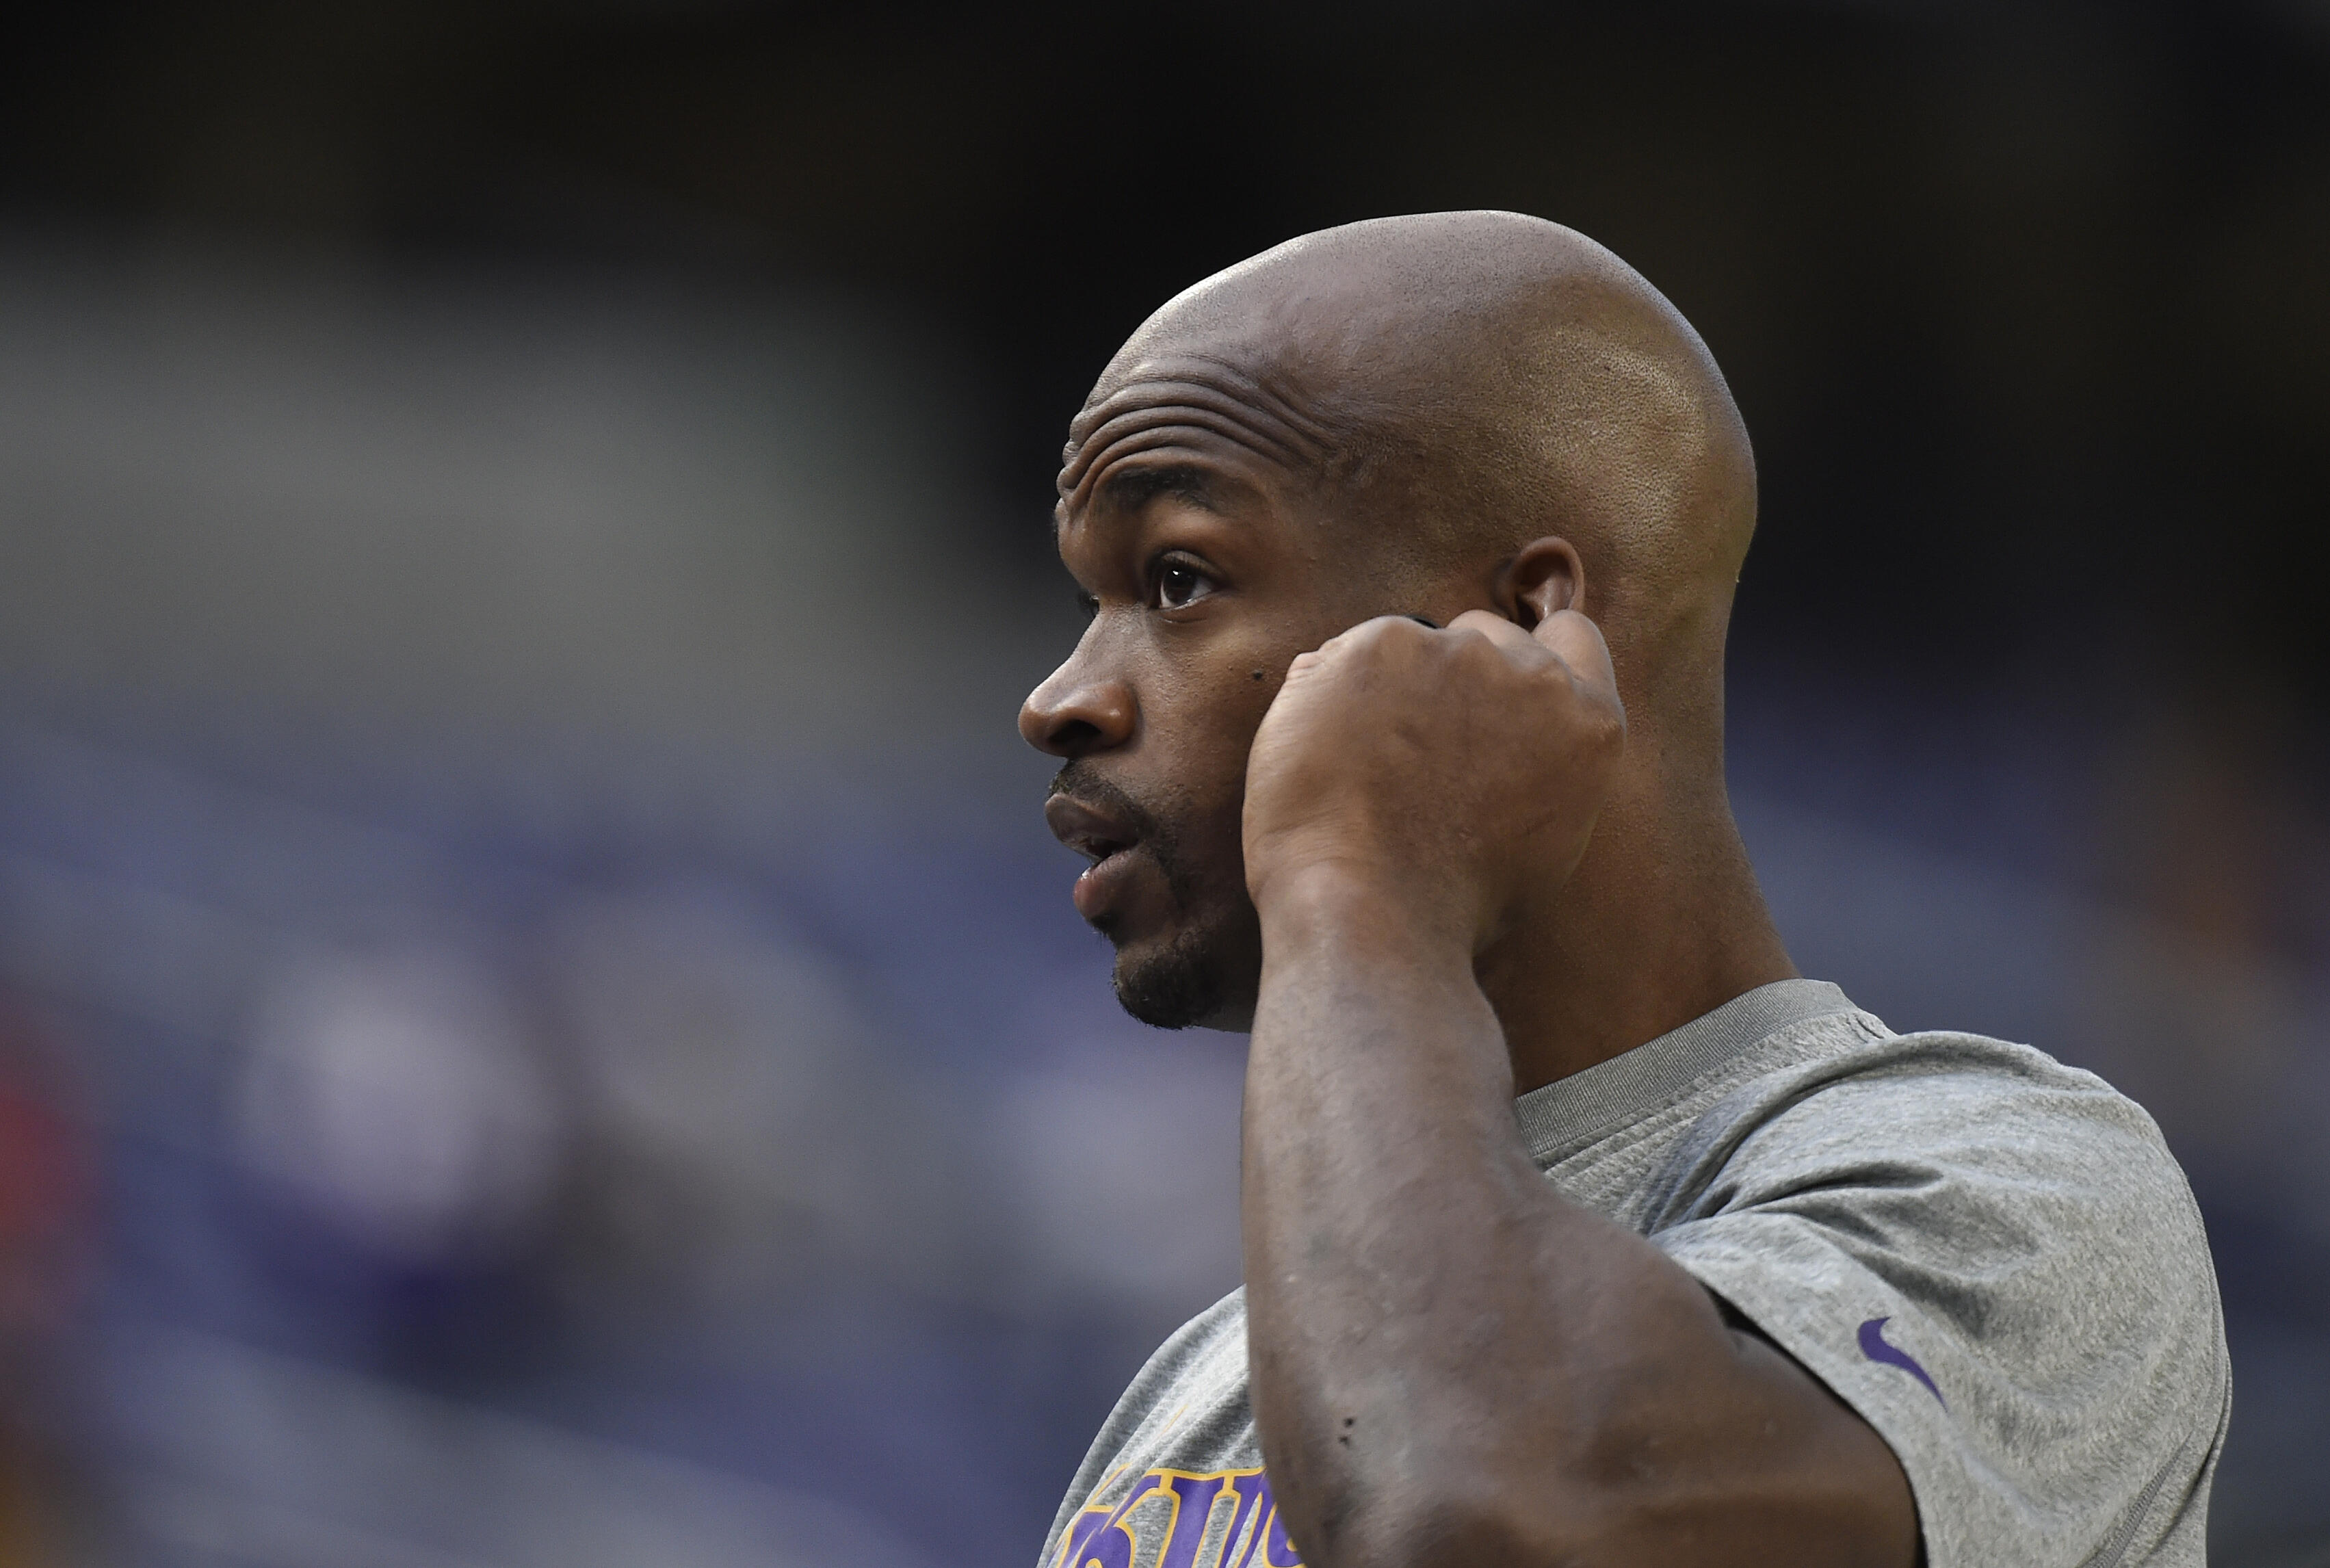 MINNEAPOLIS, MN - DECEMBER 18: Adrian Peterson #28 of the Minnesota Vikings warms up before the game against the Indianapolis Colts on December 18, 2016 at US Bank Stadium in Minneapolis, Minnesota. Peterson returns to play after injuring his knee in week